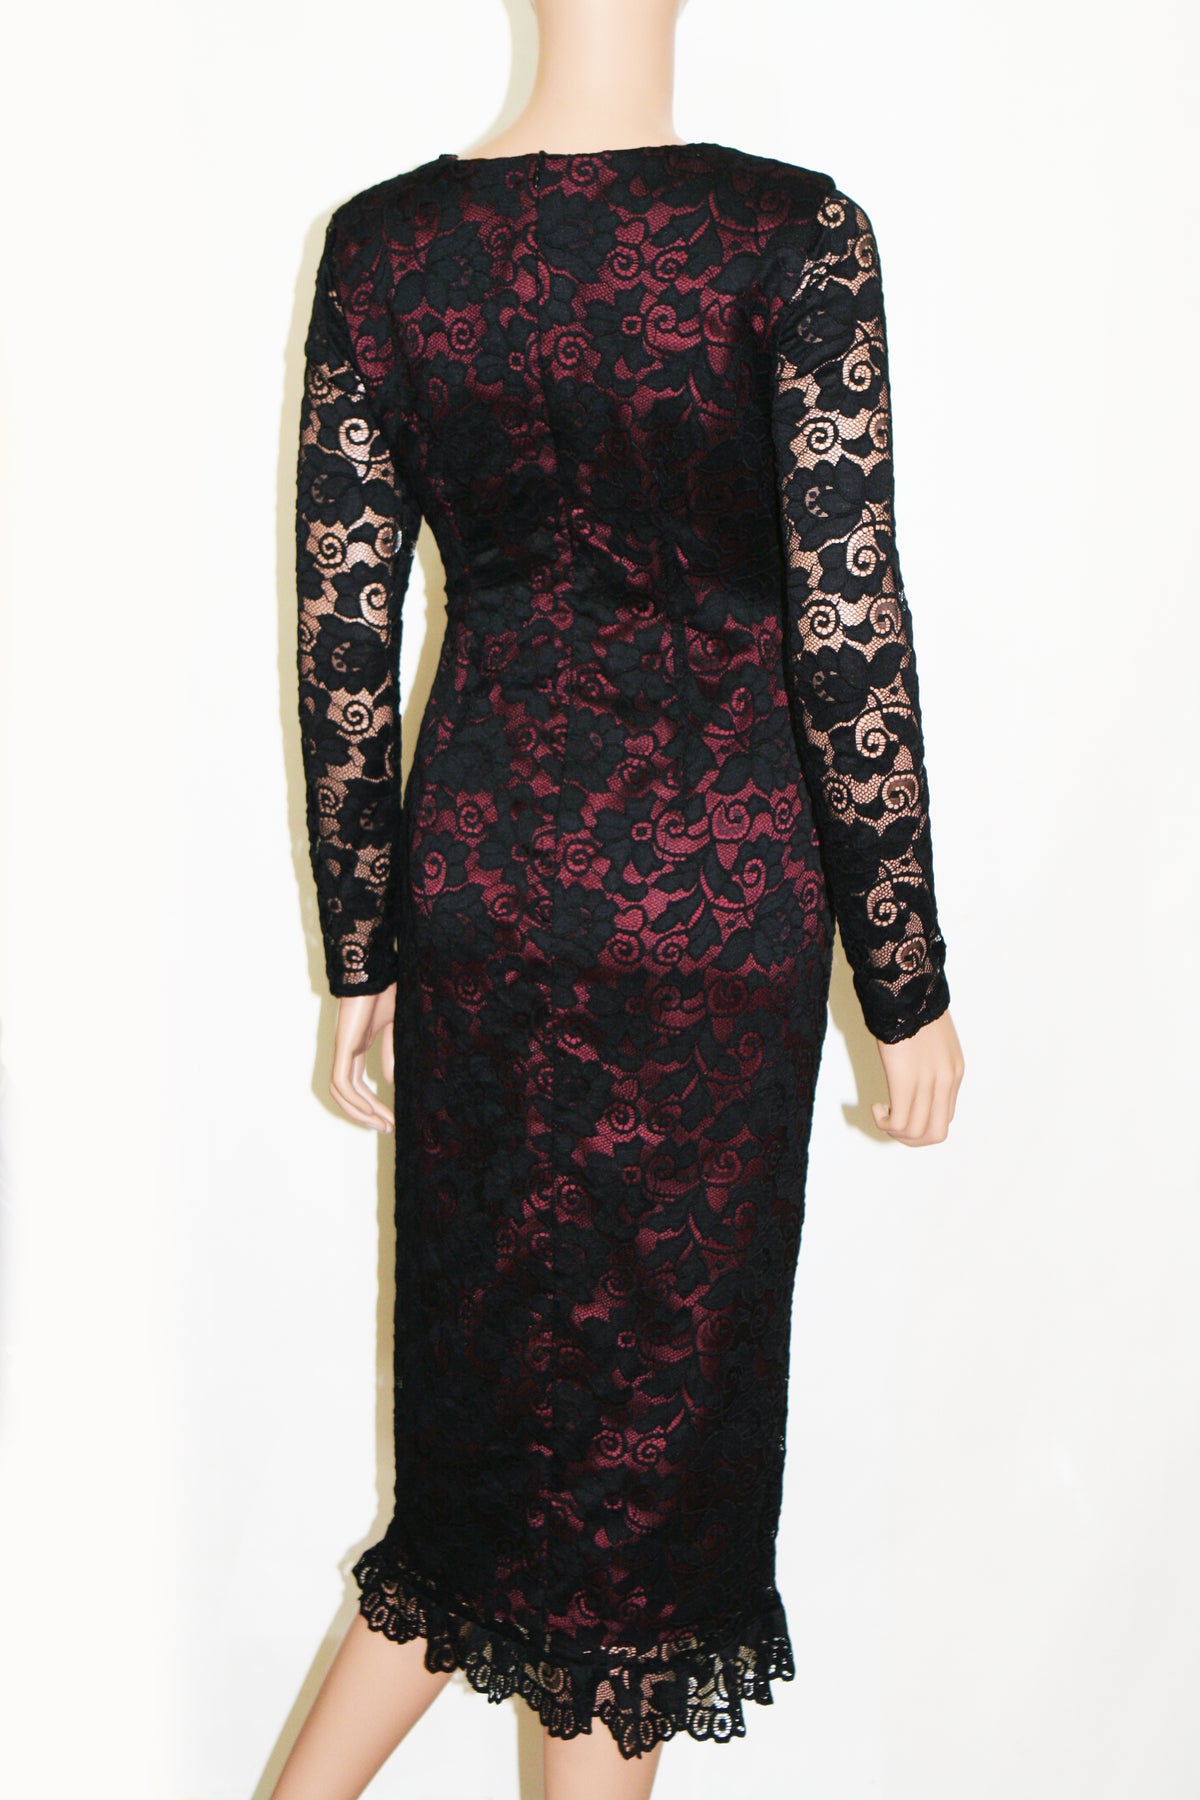 Rosewood Lace dress with Long Sleeves – Caeli Couture